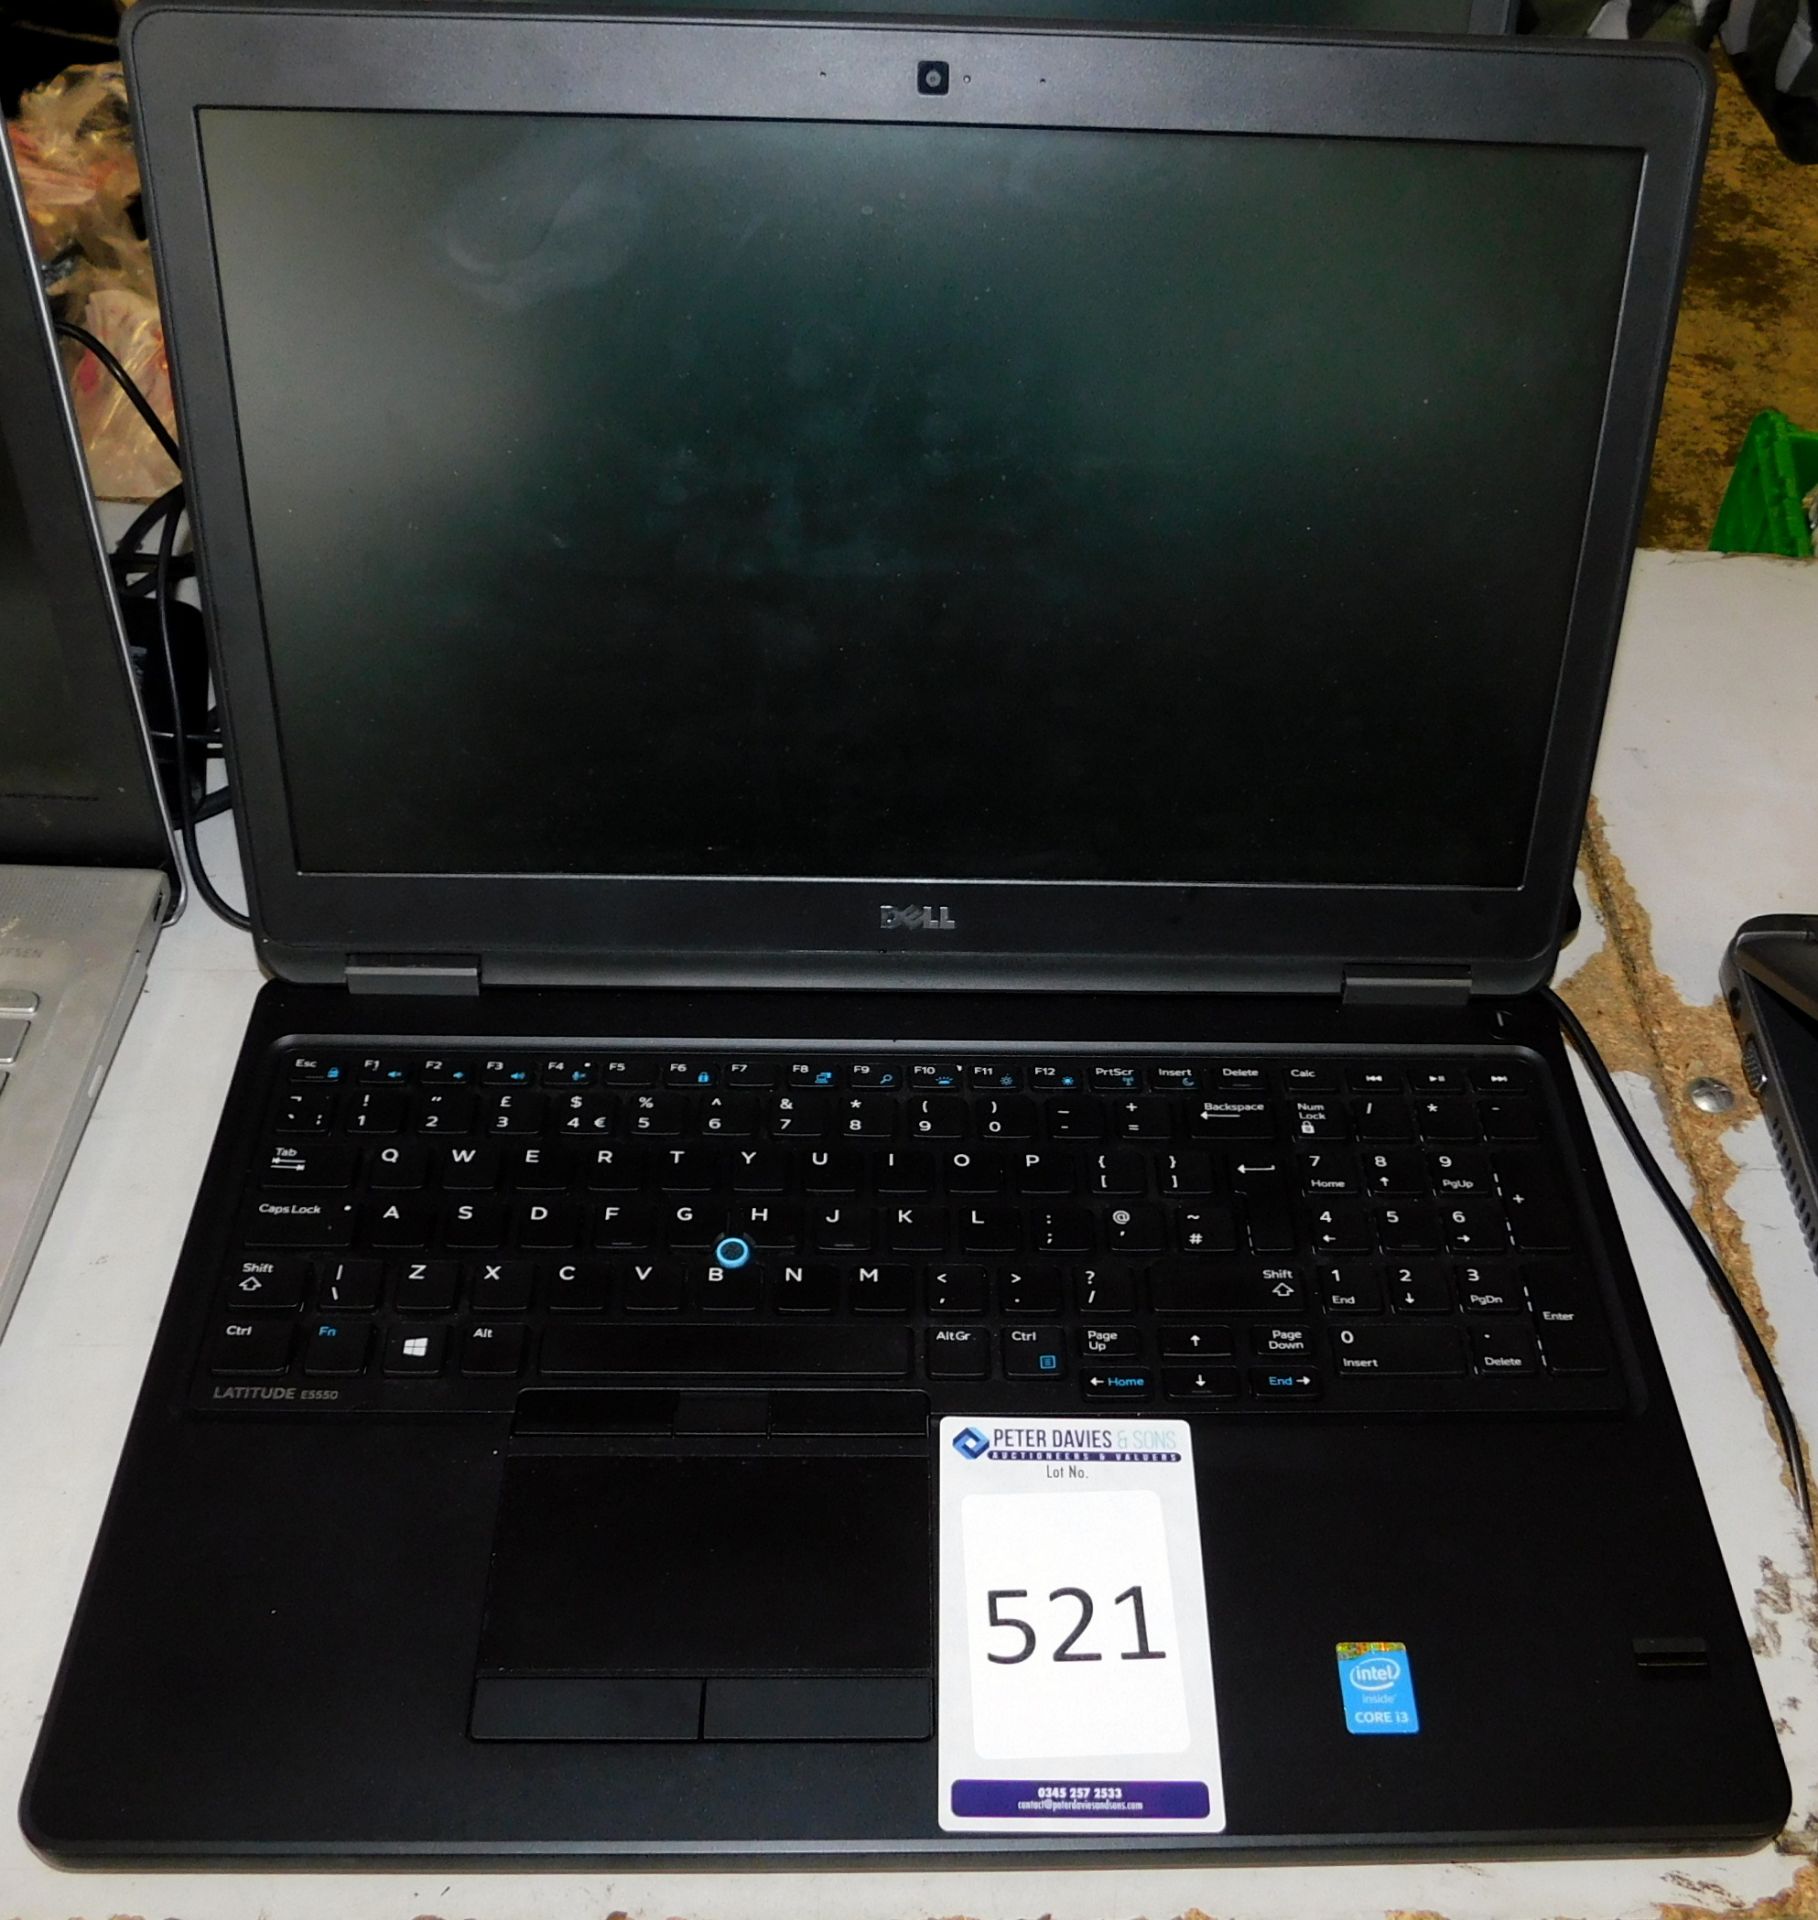 Dell Latitude E5550 i3 2.10ghz Laptop with 4gb RAM, 500gb HDD (Located Stockport – Viewing by